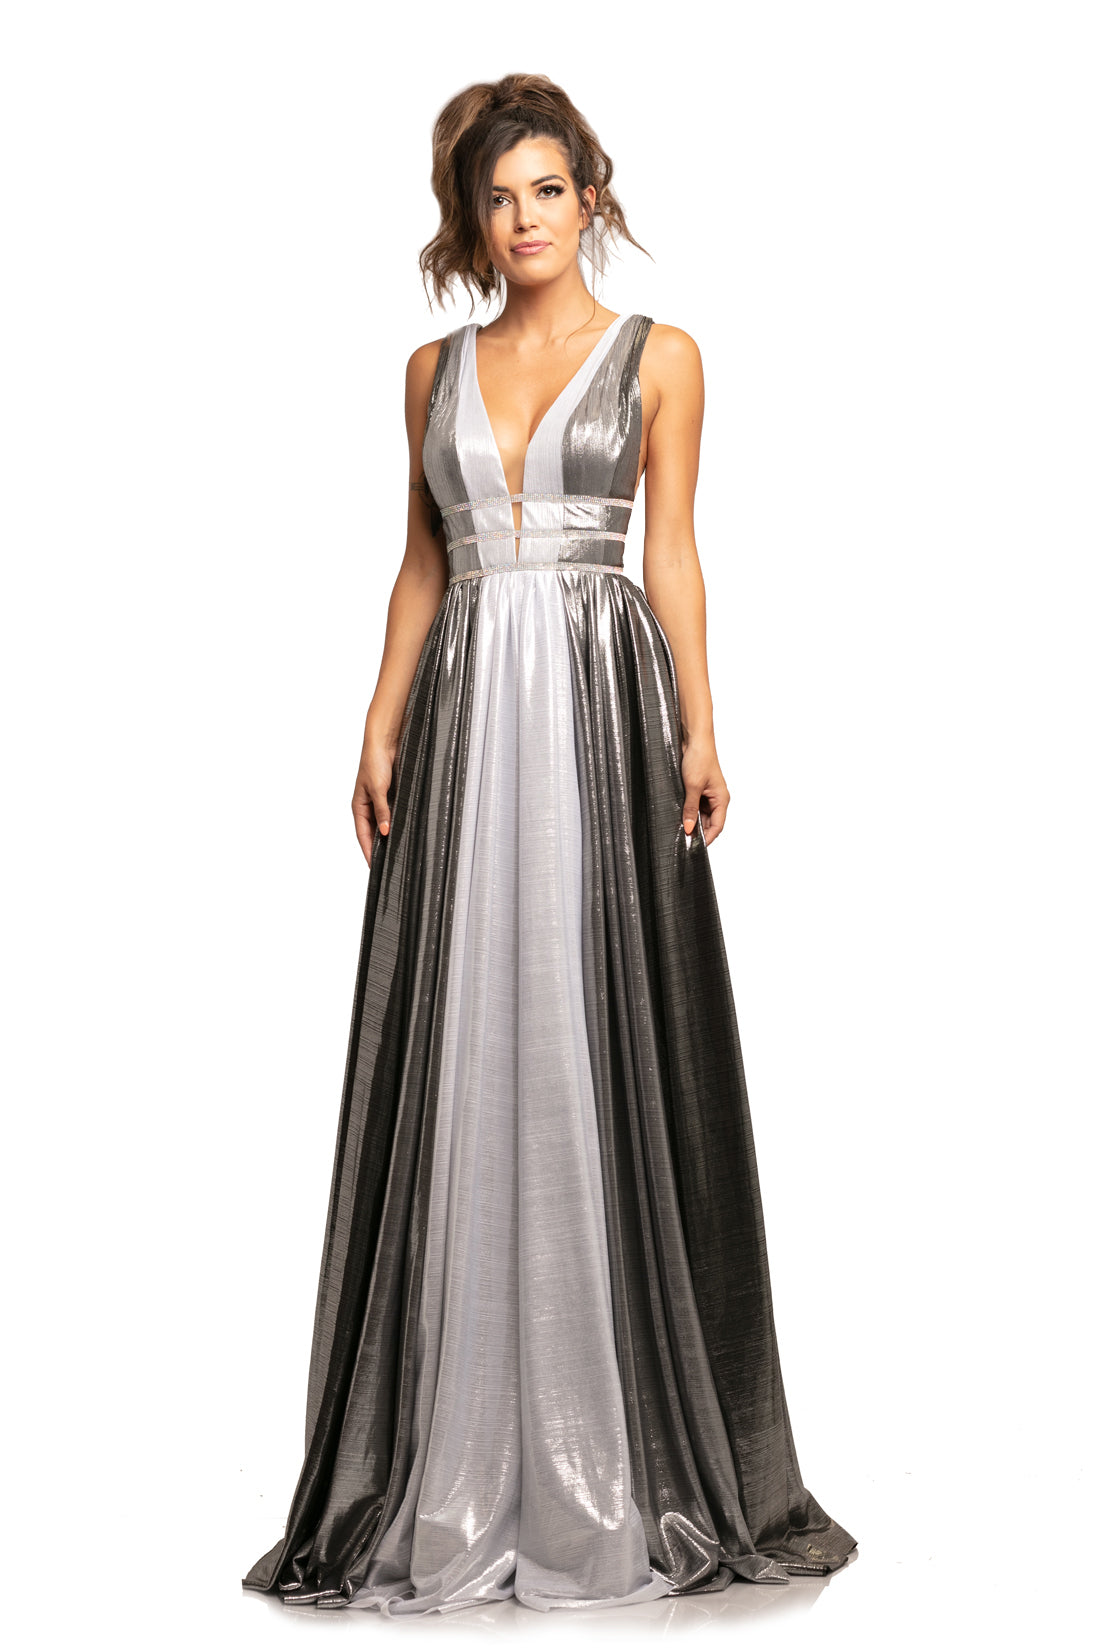 2,036 Silver Sequined Evening Dress Images, Stock Photos, 3D